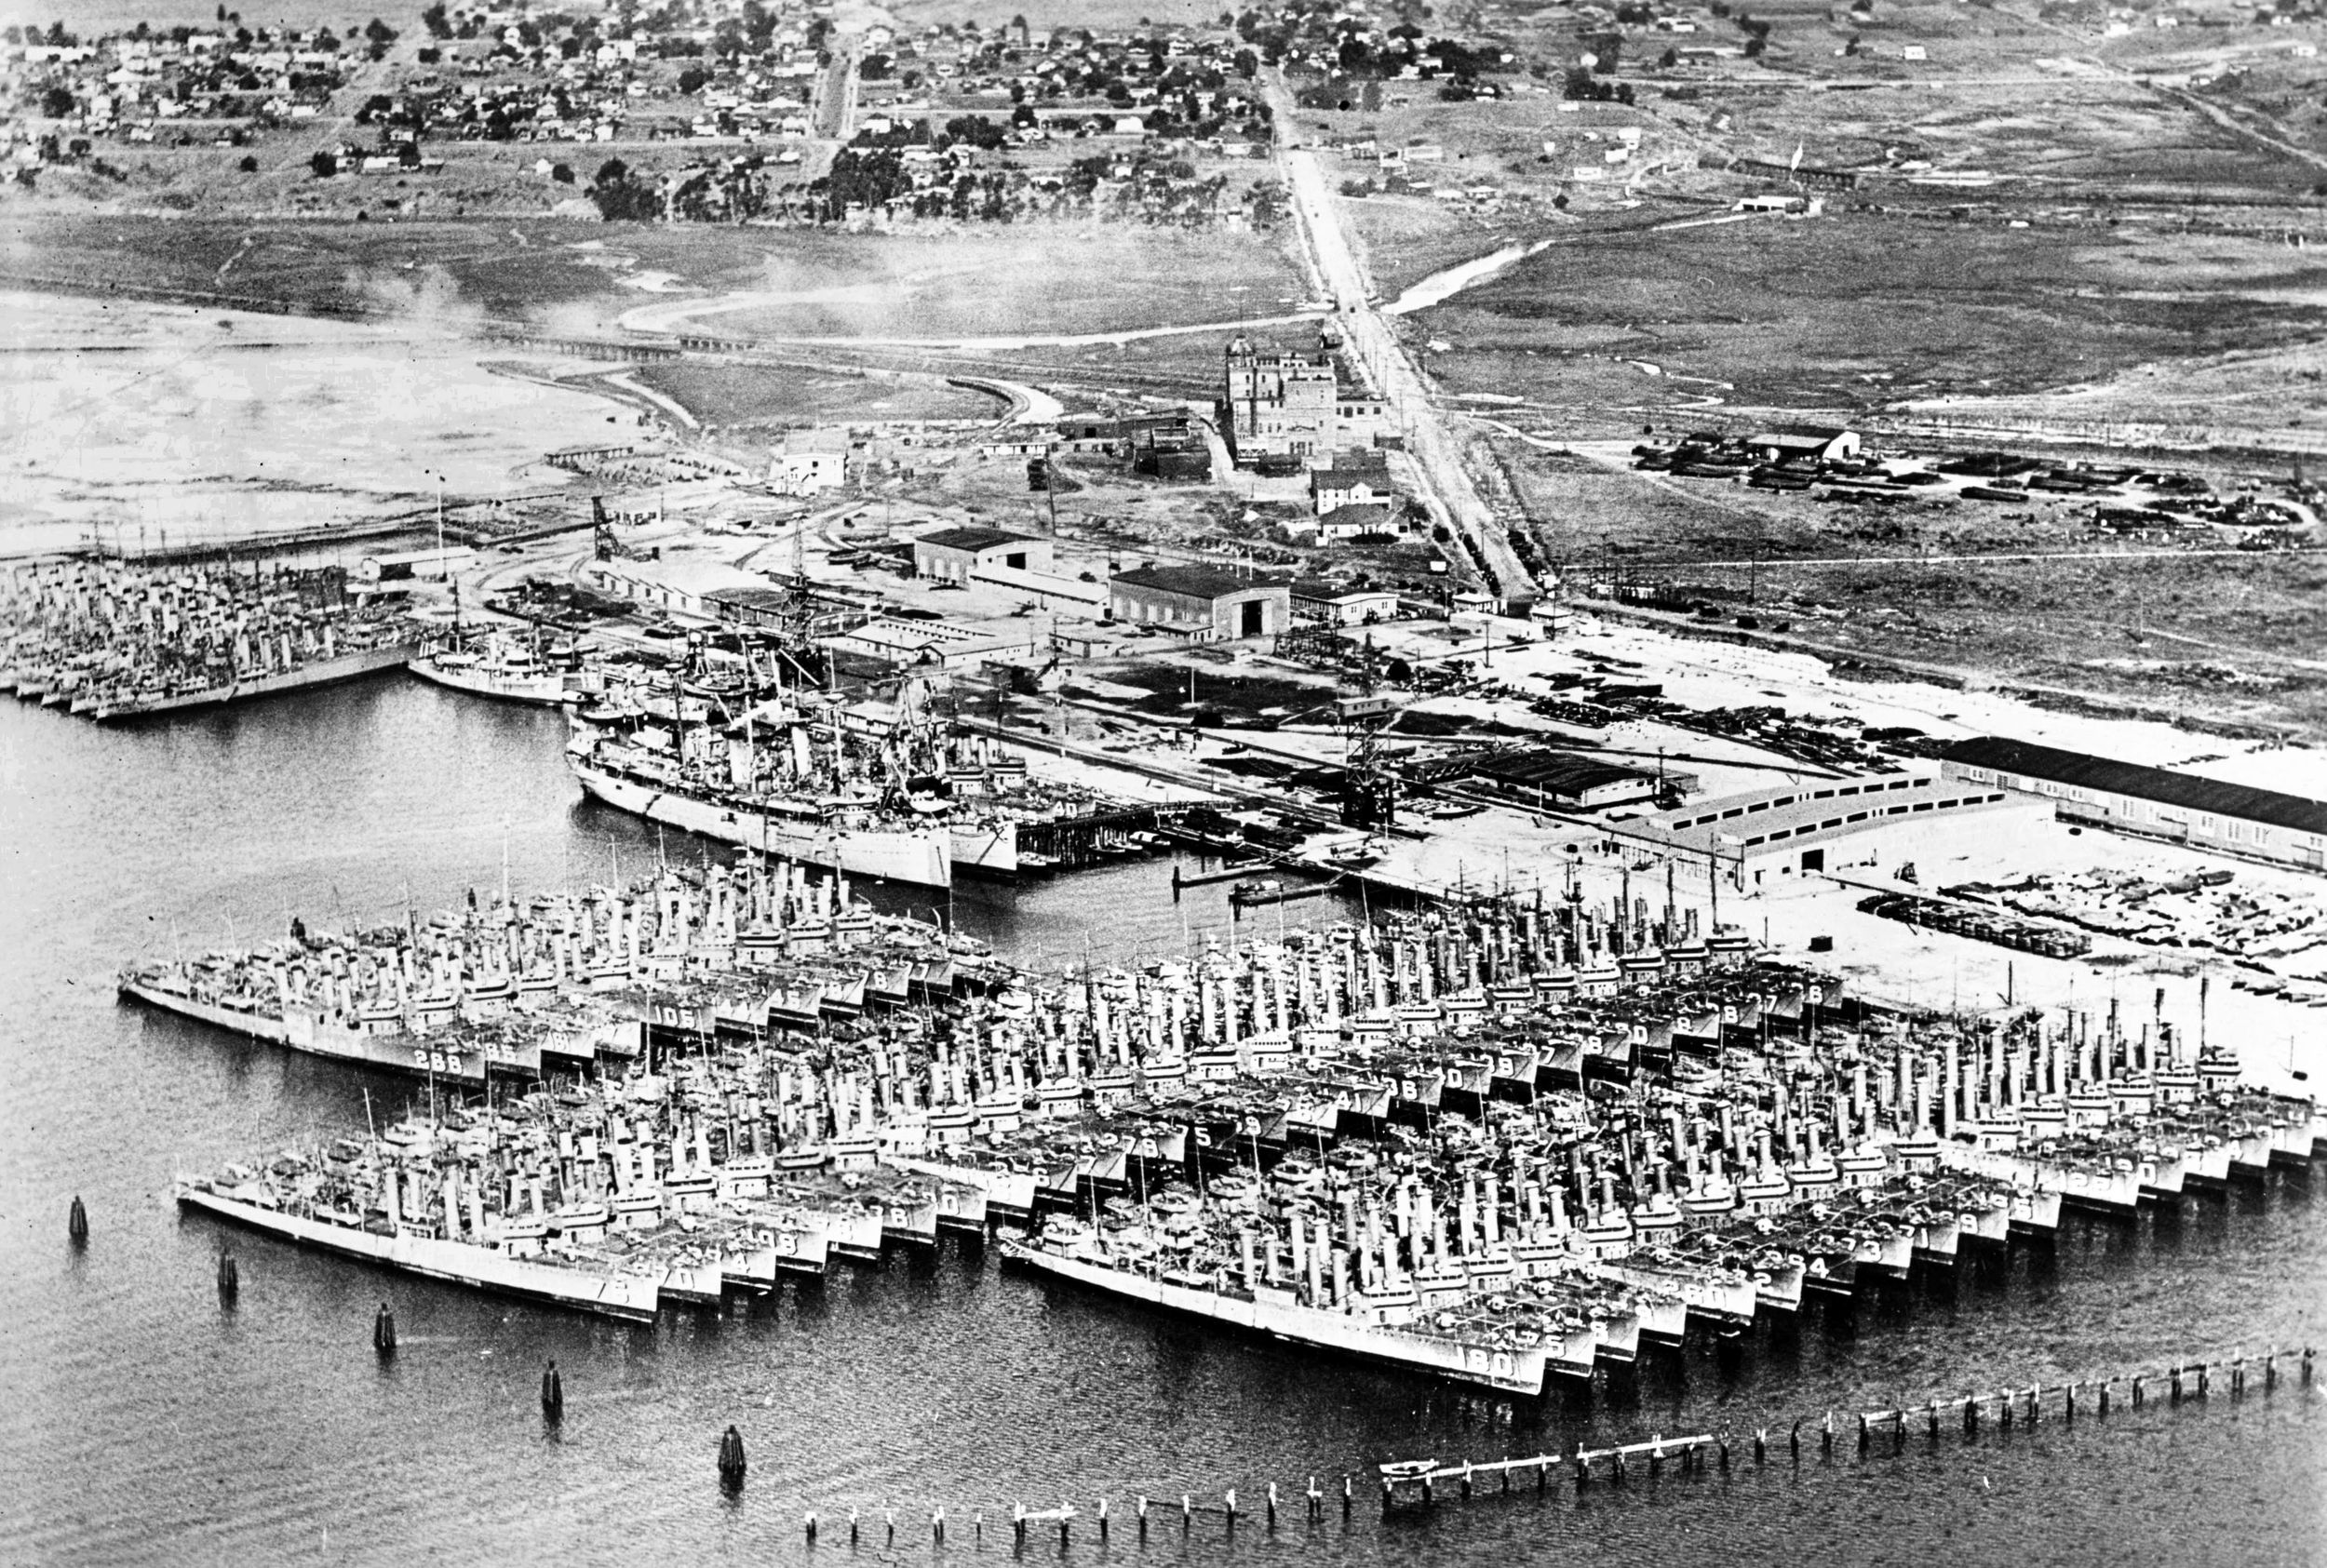 At the San Diego Destroyer Base in California, some 65 destroyers are tied up at “Red Lead Row.” The Zane was decommissioned at San Diego in February 1923, and remained here for seven years. She spent the 1930s as a destroyer with the 2nd Destroyer Flotilla. At the Pearl Harbor Navy Yard in 1940, she was reclassified as Destroyer Mine Sweeper 14 (DMS-14).